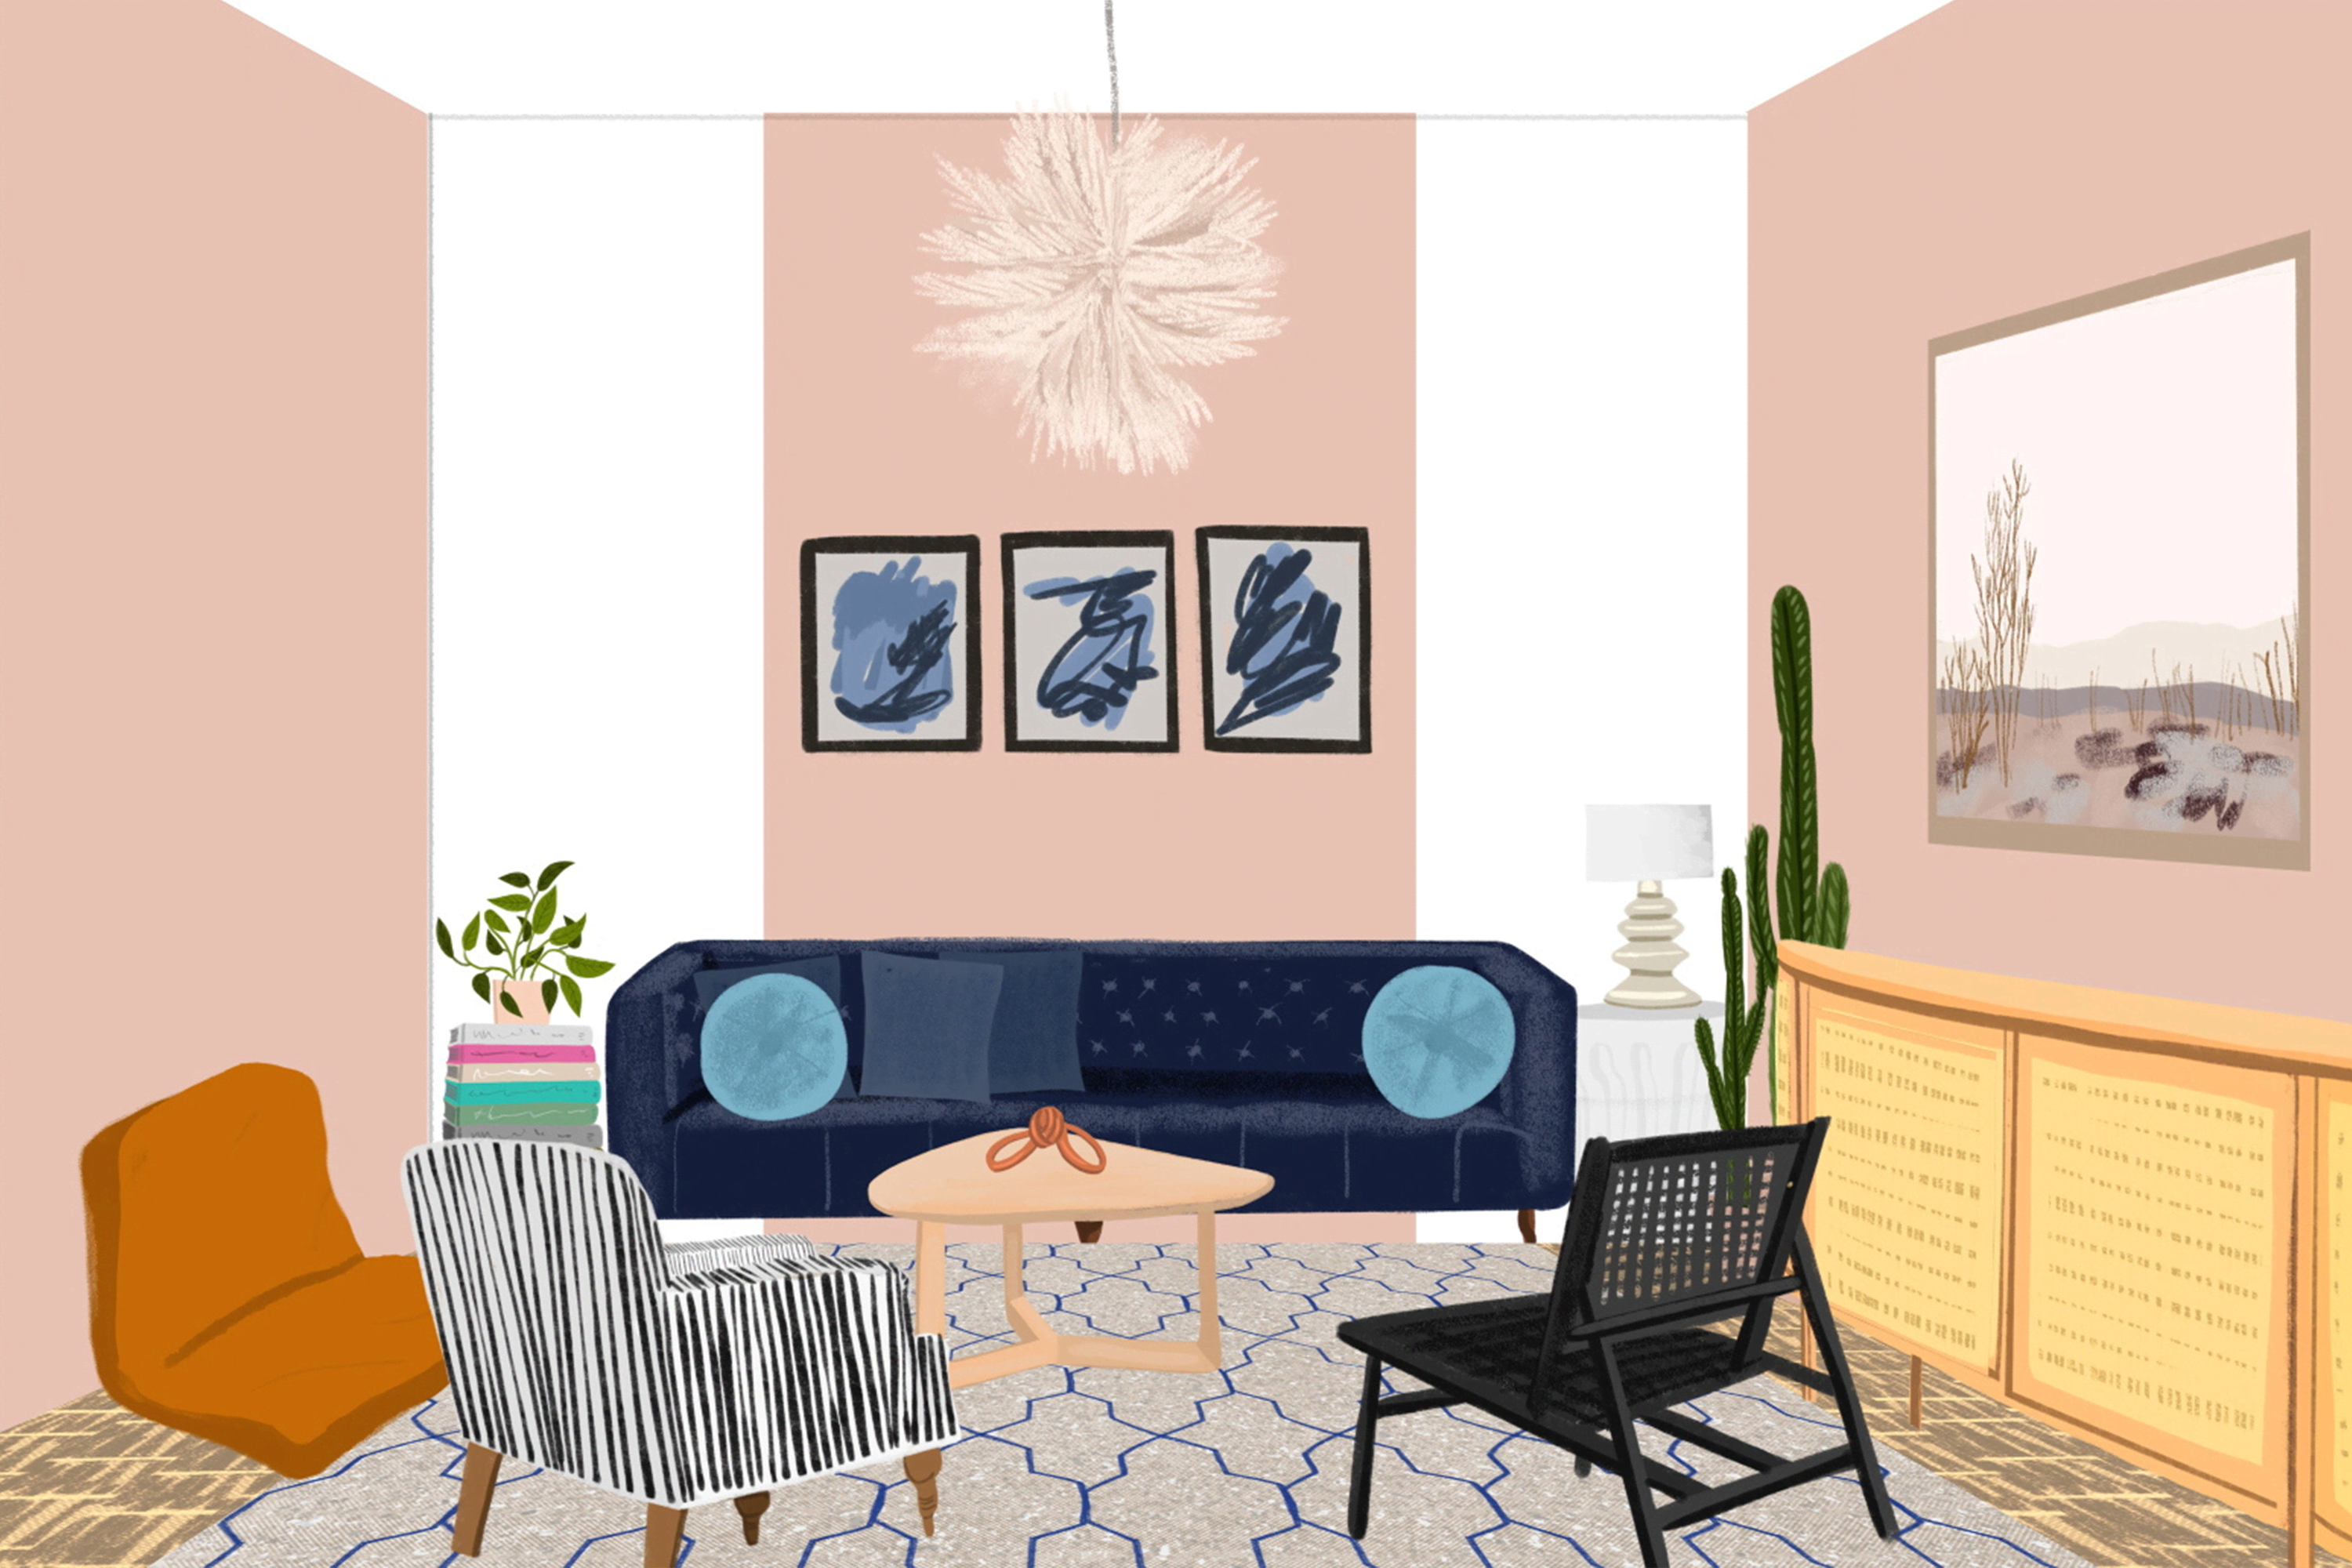 https://cdn.apartmenttherapy.info/image/upload/v1589311372/small%20cool/2020%20Online%20Experience/Stills%20of%20Illustrated%20Rooms/Danielle2.png